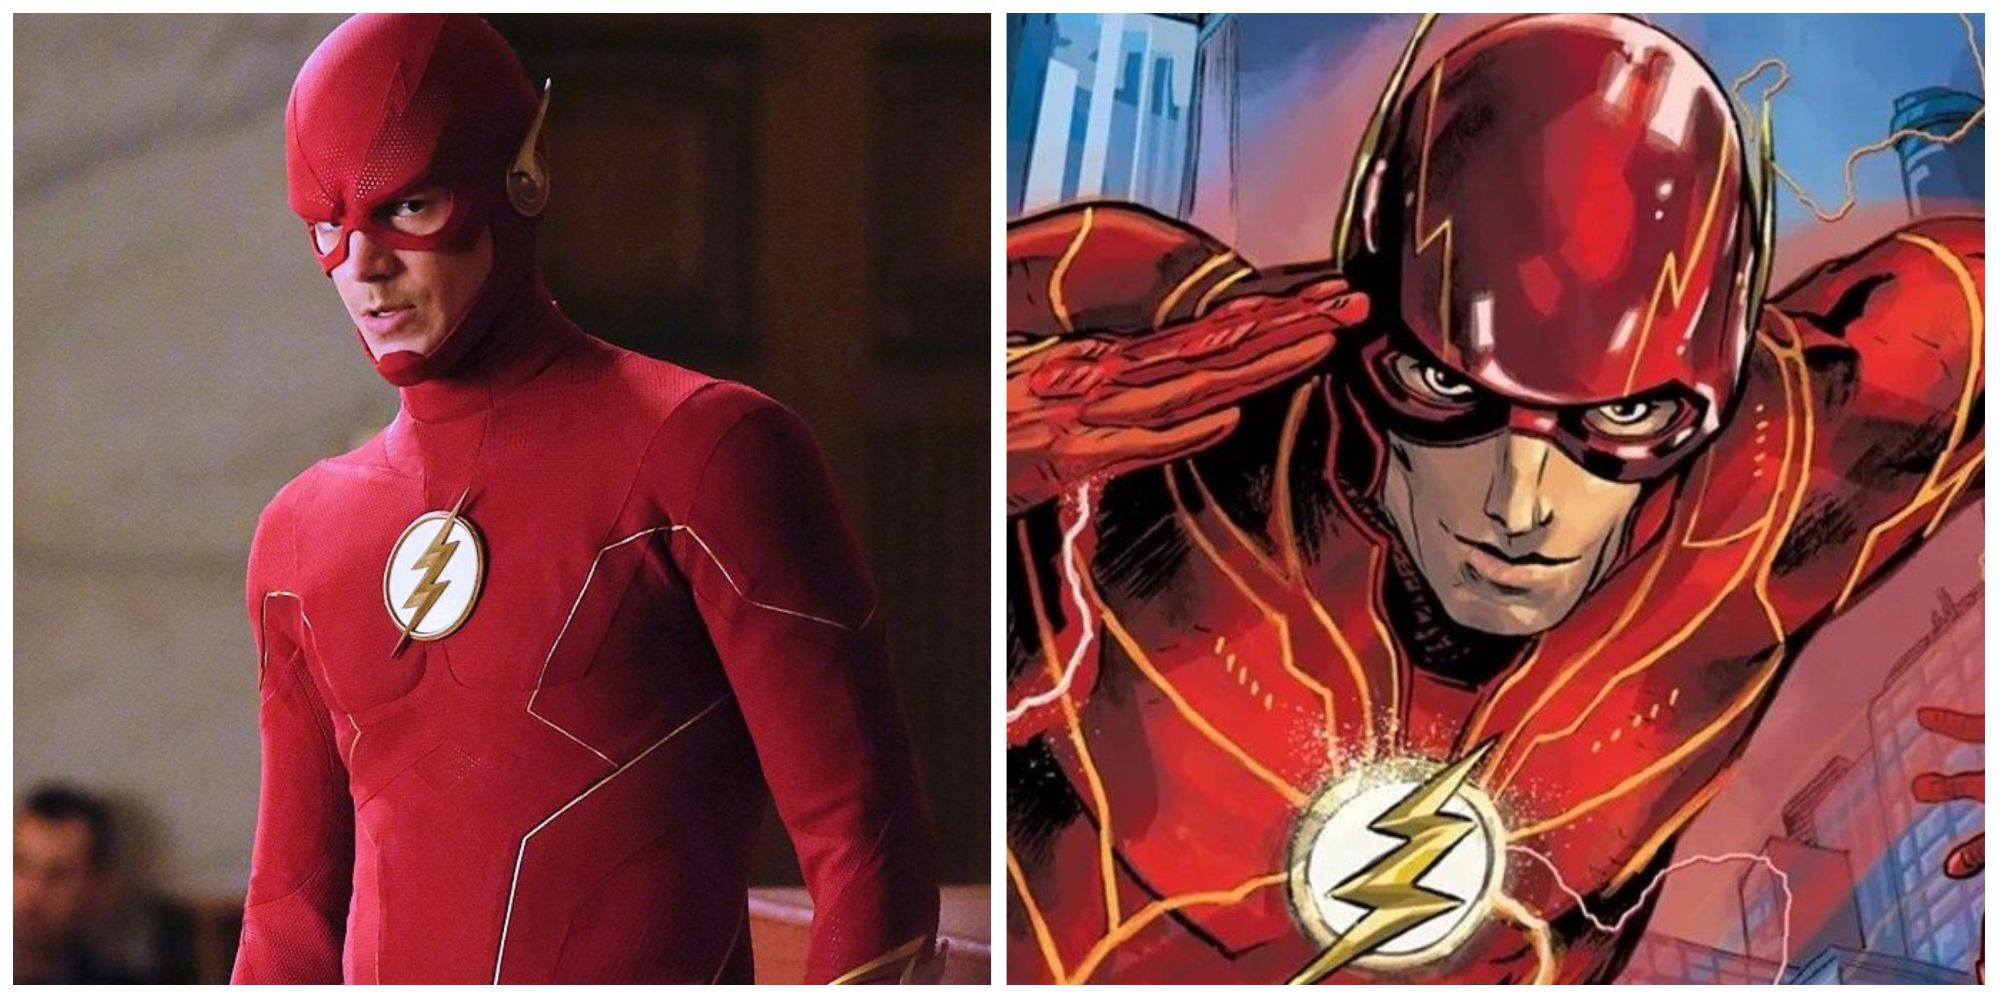 A split image of The Flash in the Arrowverse and Wally West in DC Comics